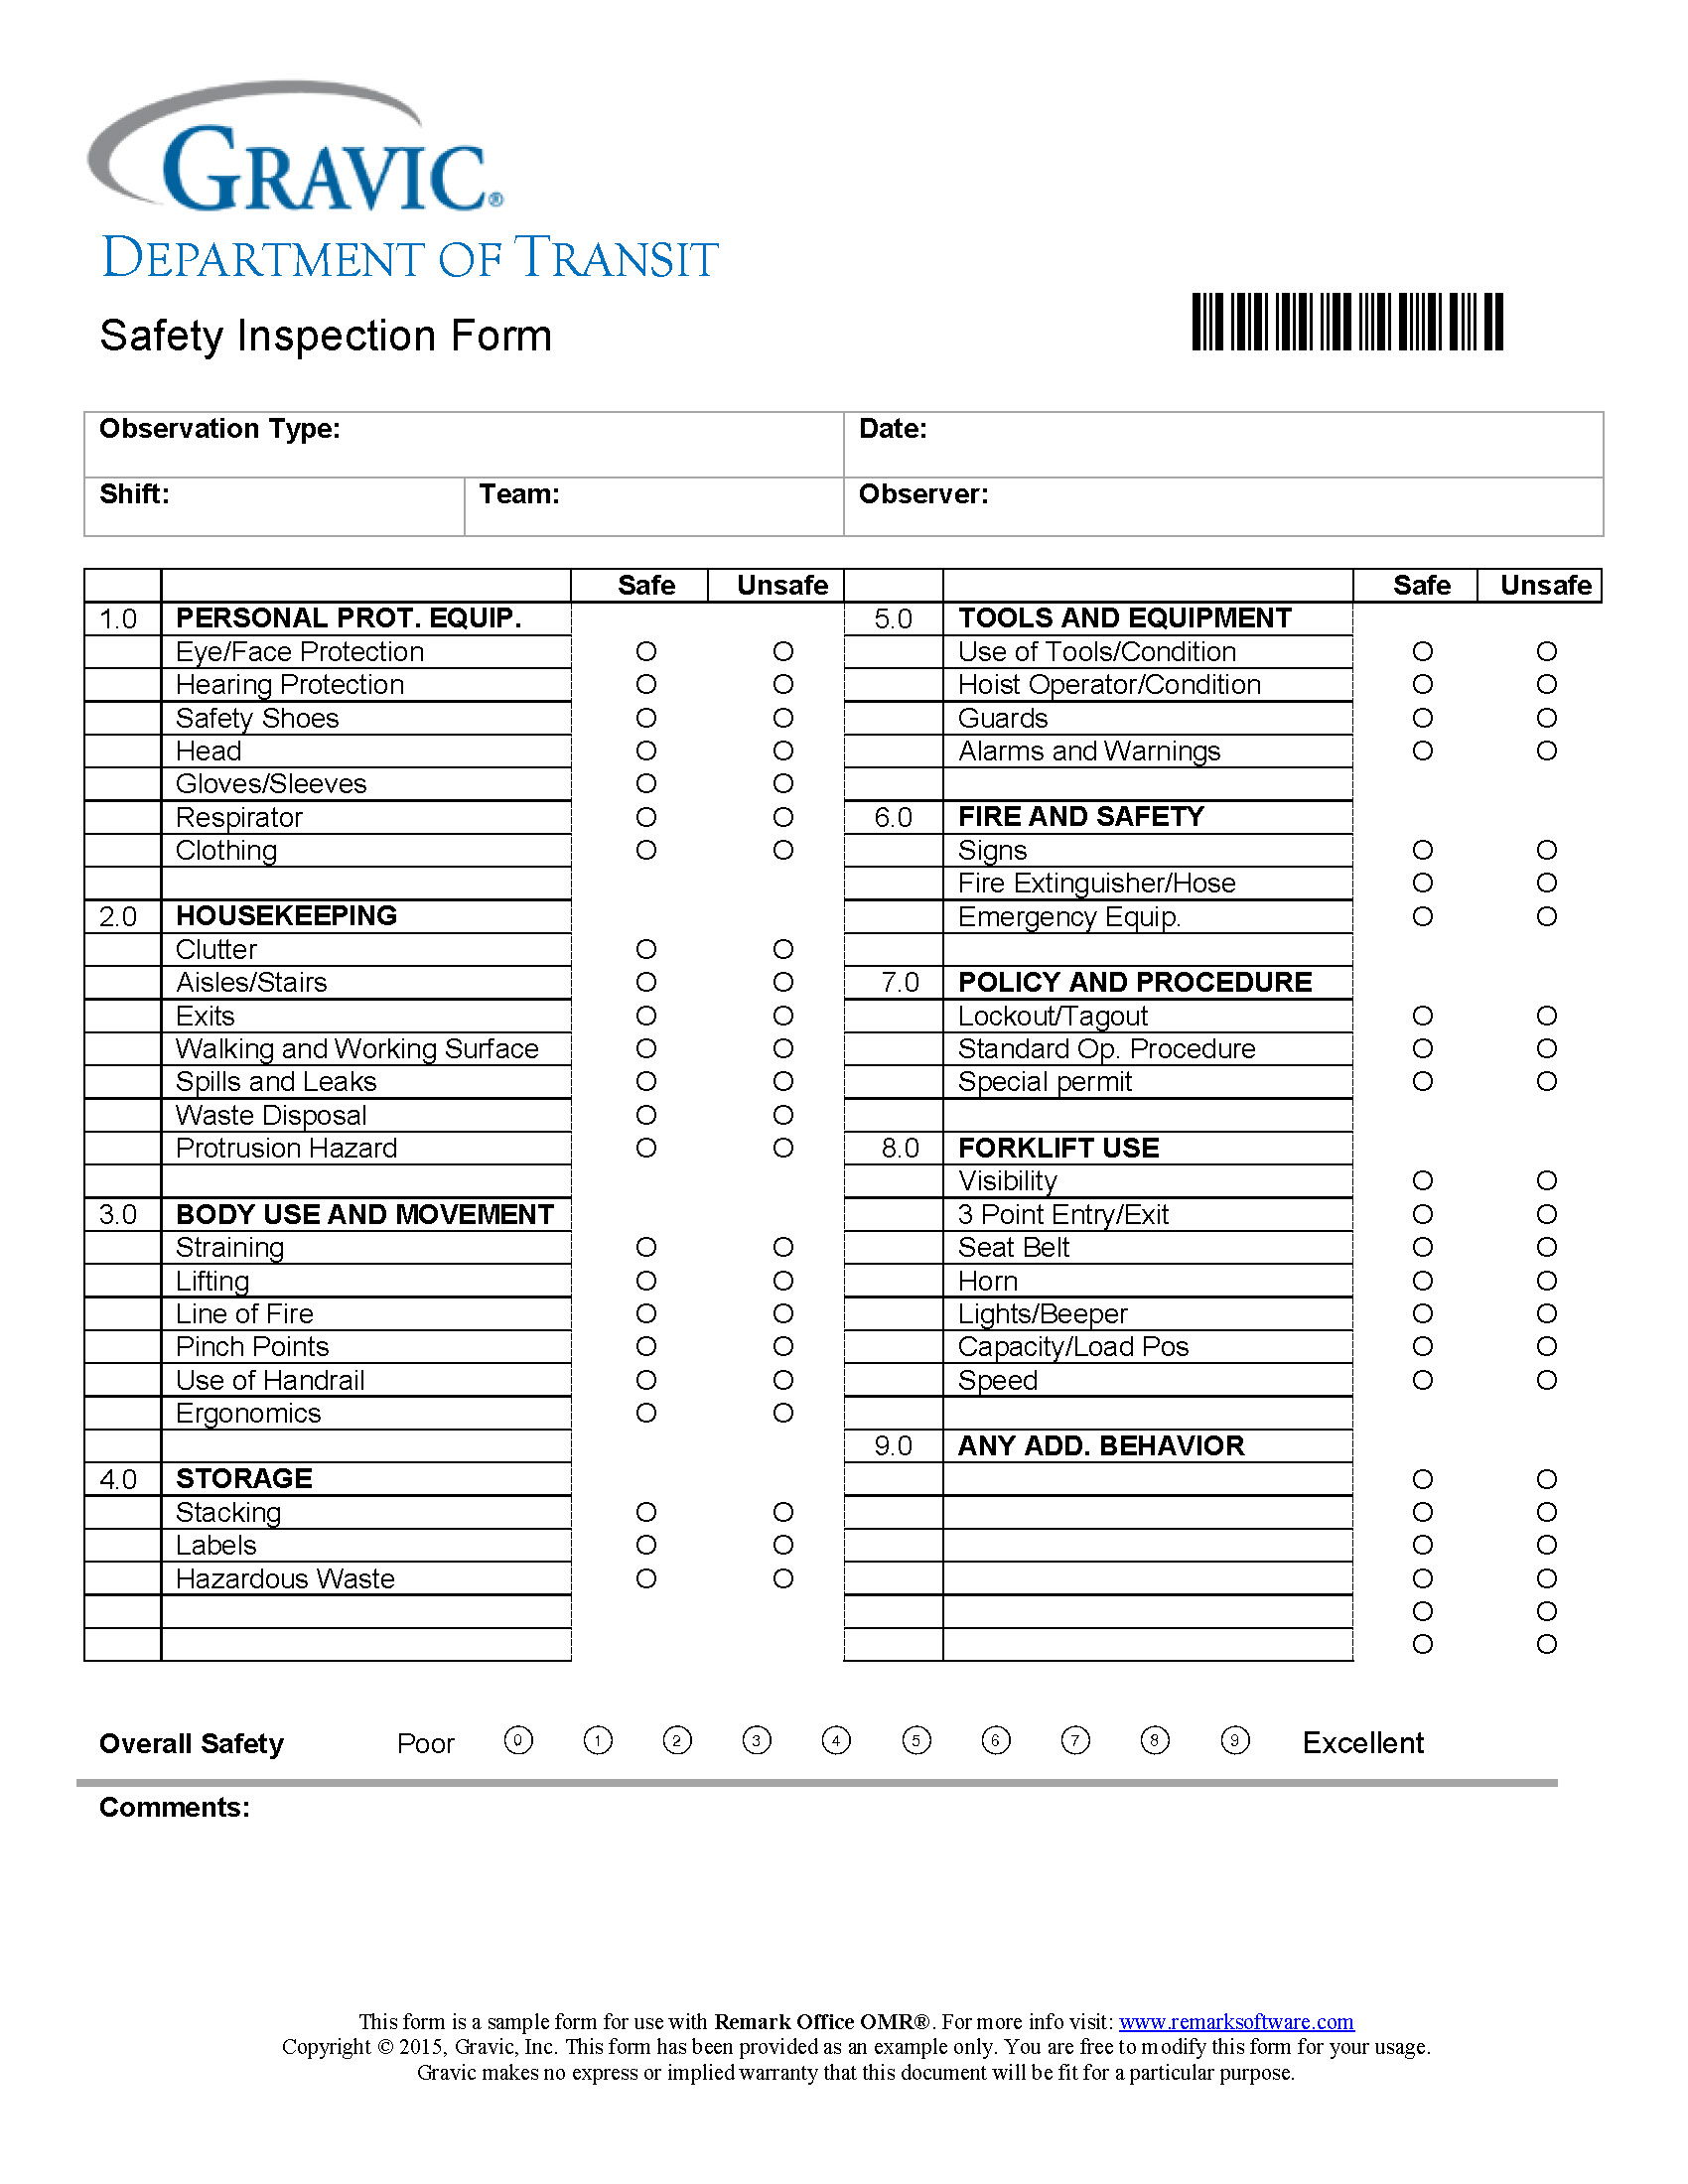 Department of Transit Safety Inspection Form · Remark Software